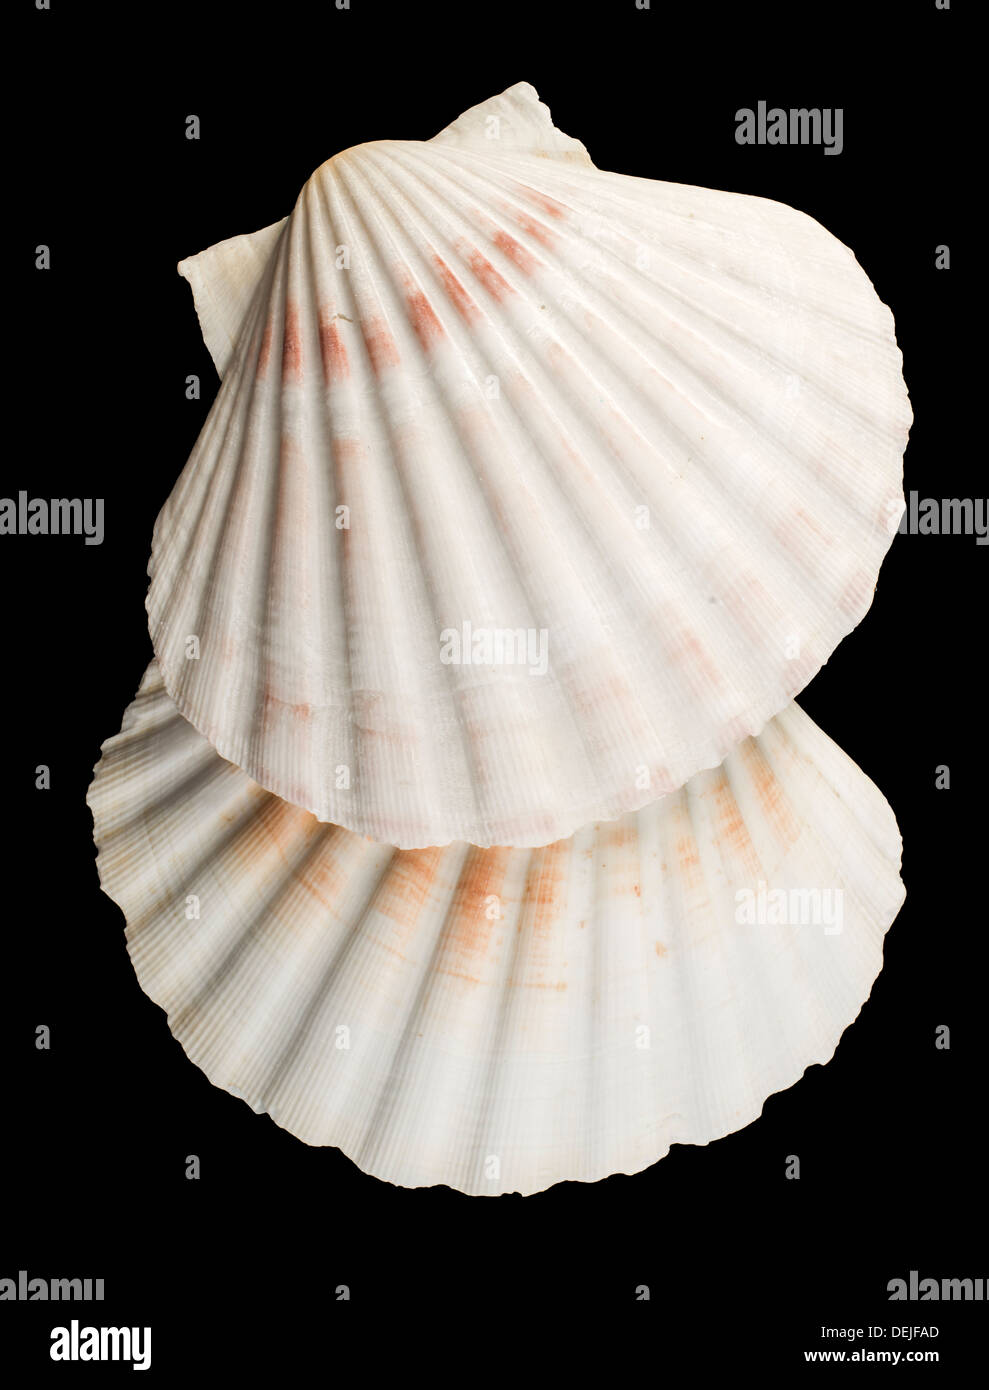 Scallop shell. Black isolated Stock Photo